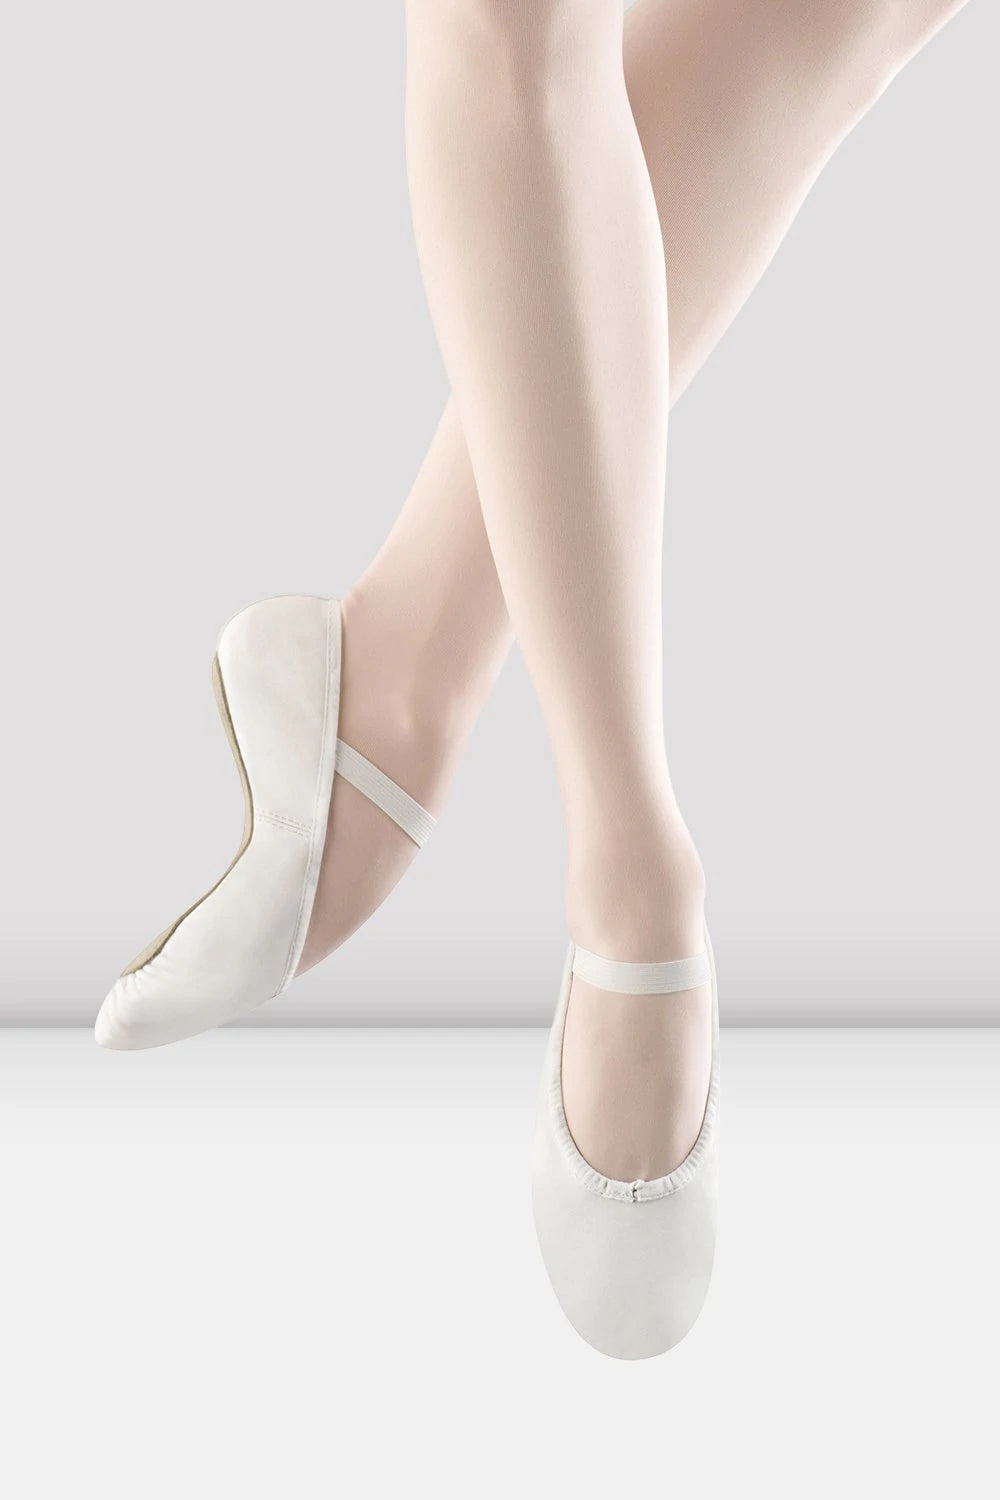 Sale Bloch Leather Full Sole Ballet Shoes  #205- White